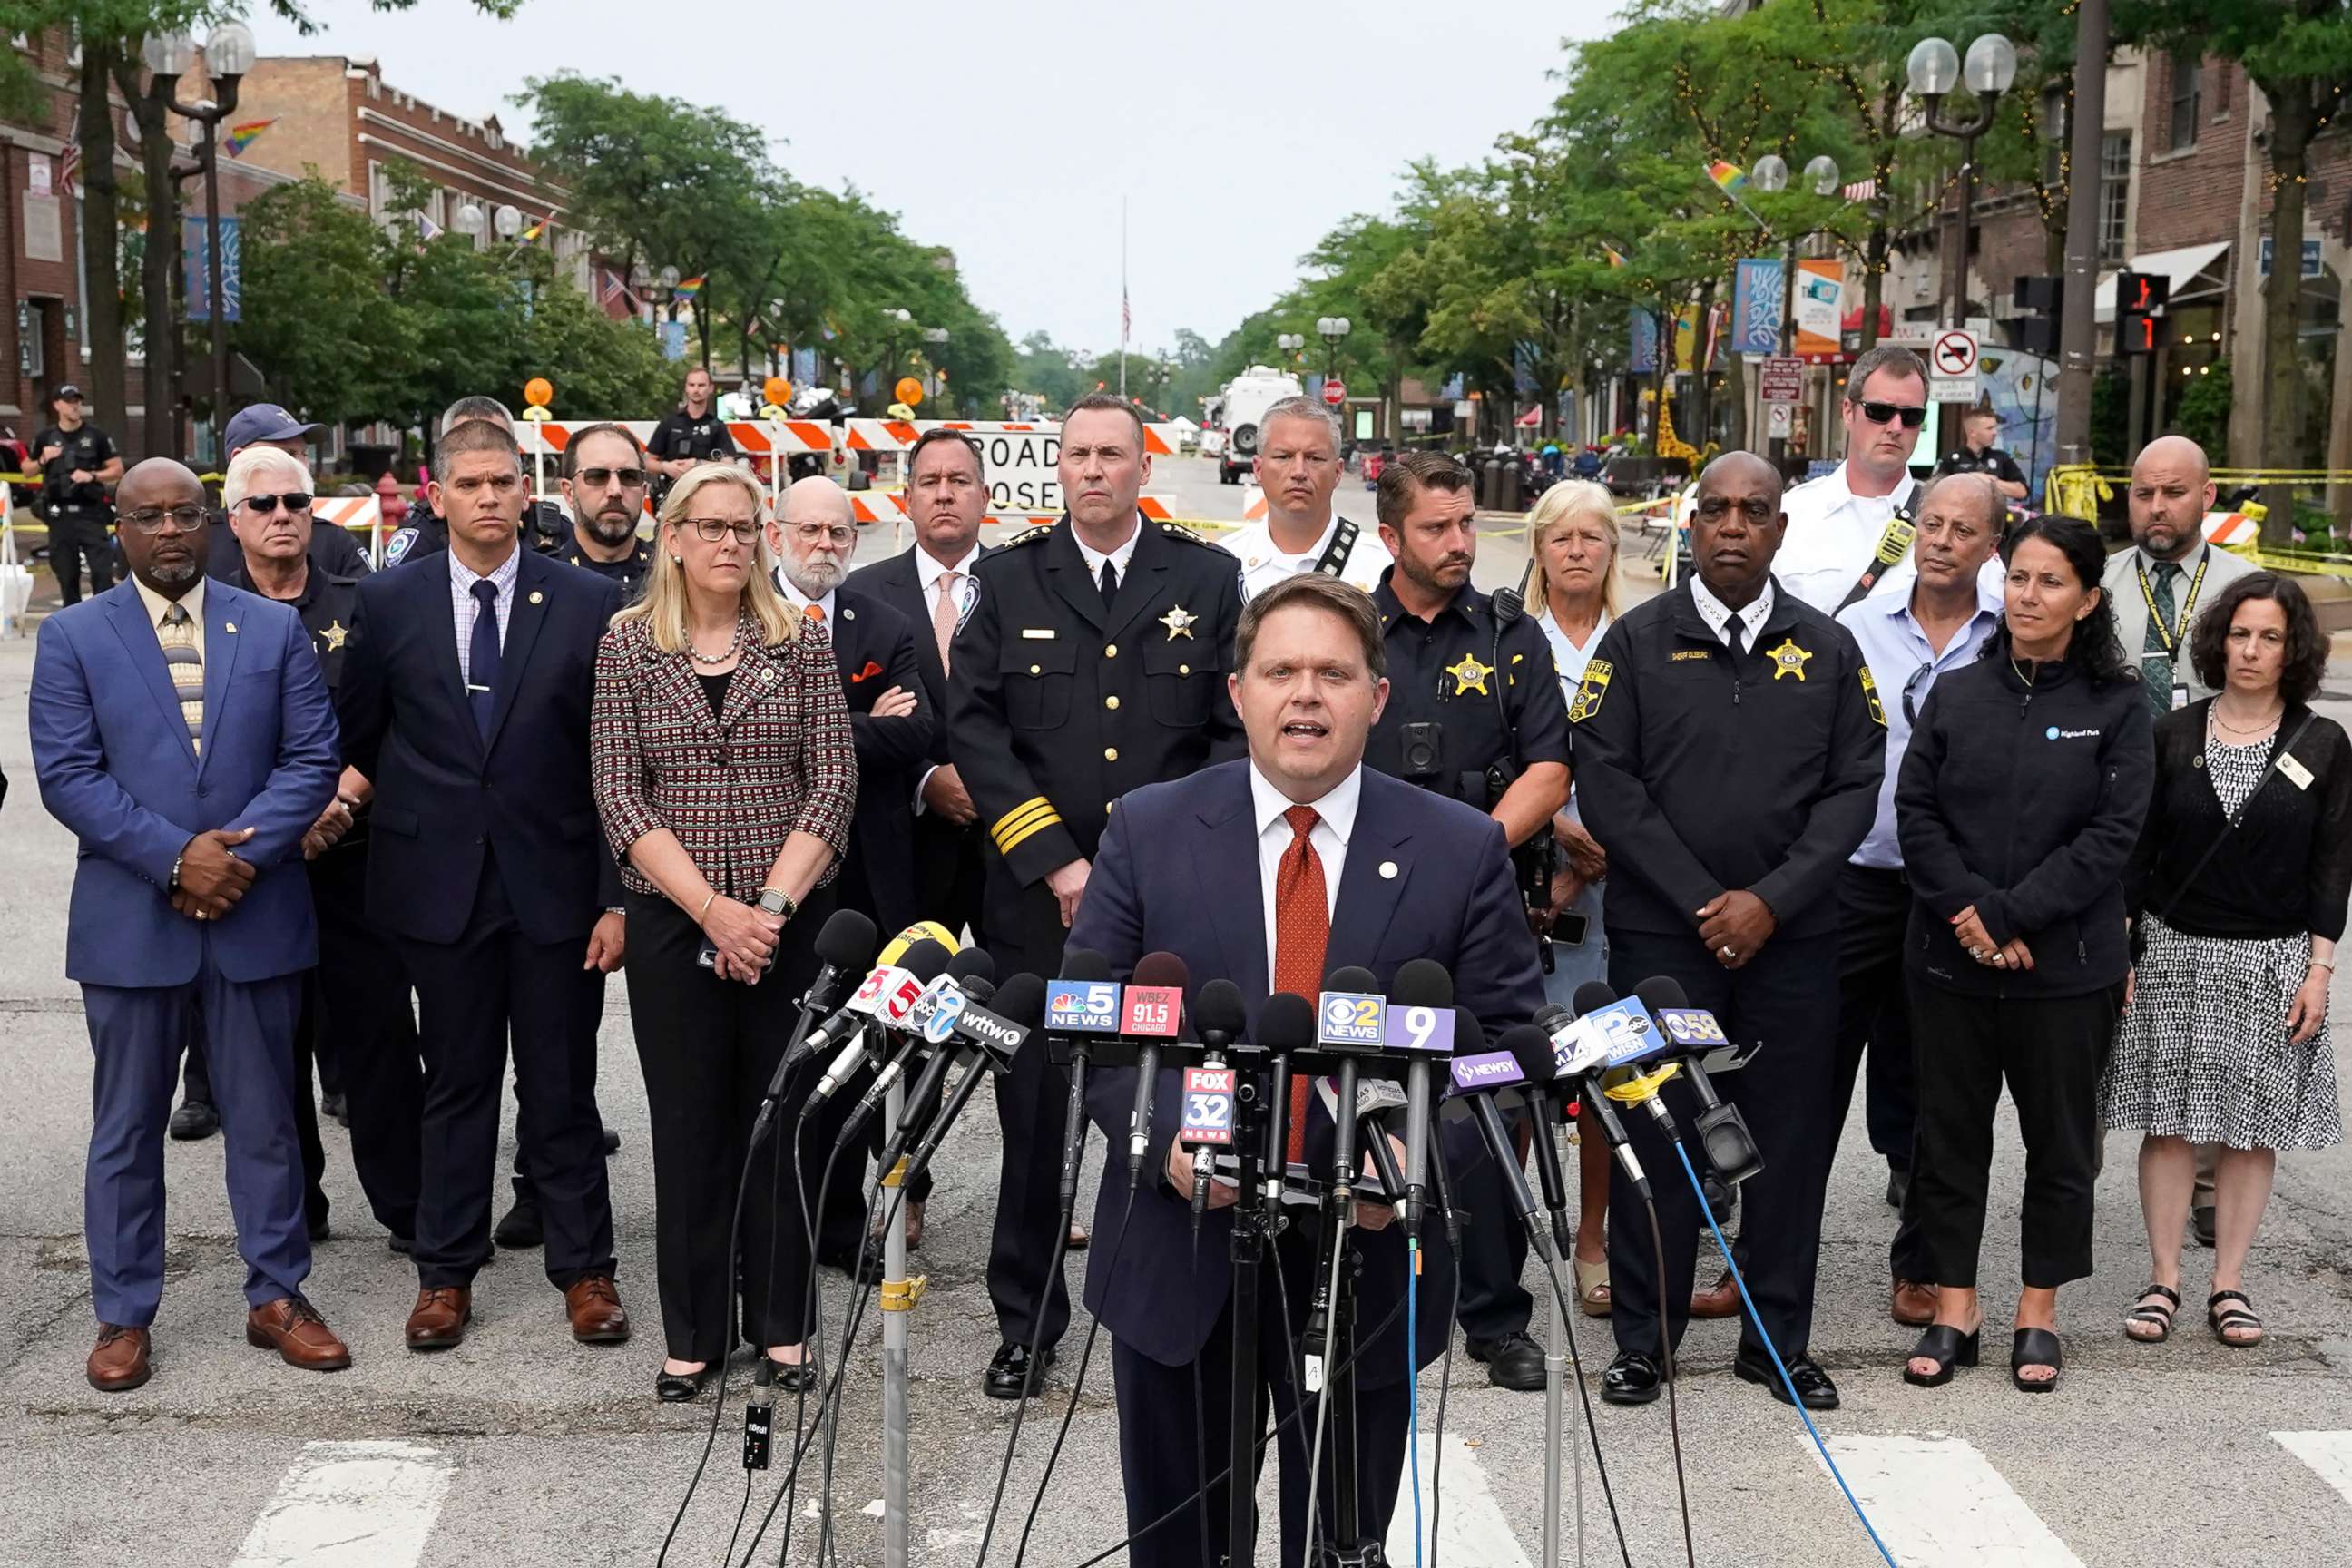 PHOTO: Surrounded by law enforcement officials, State's Attorney Eric Rinehart, center, announces 7 counts of first-degree murder filed against Robert E. "Bobby'' Crimo III for the mass shooting Indepence Day parade in Highland Park, Ill., July 5, 2022.